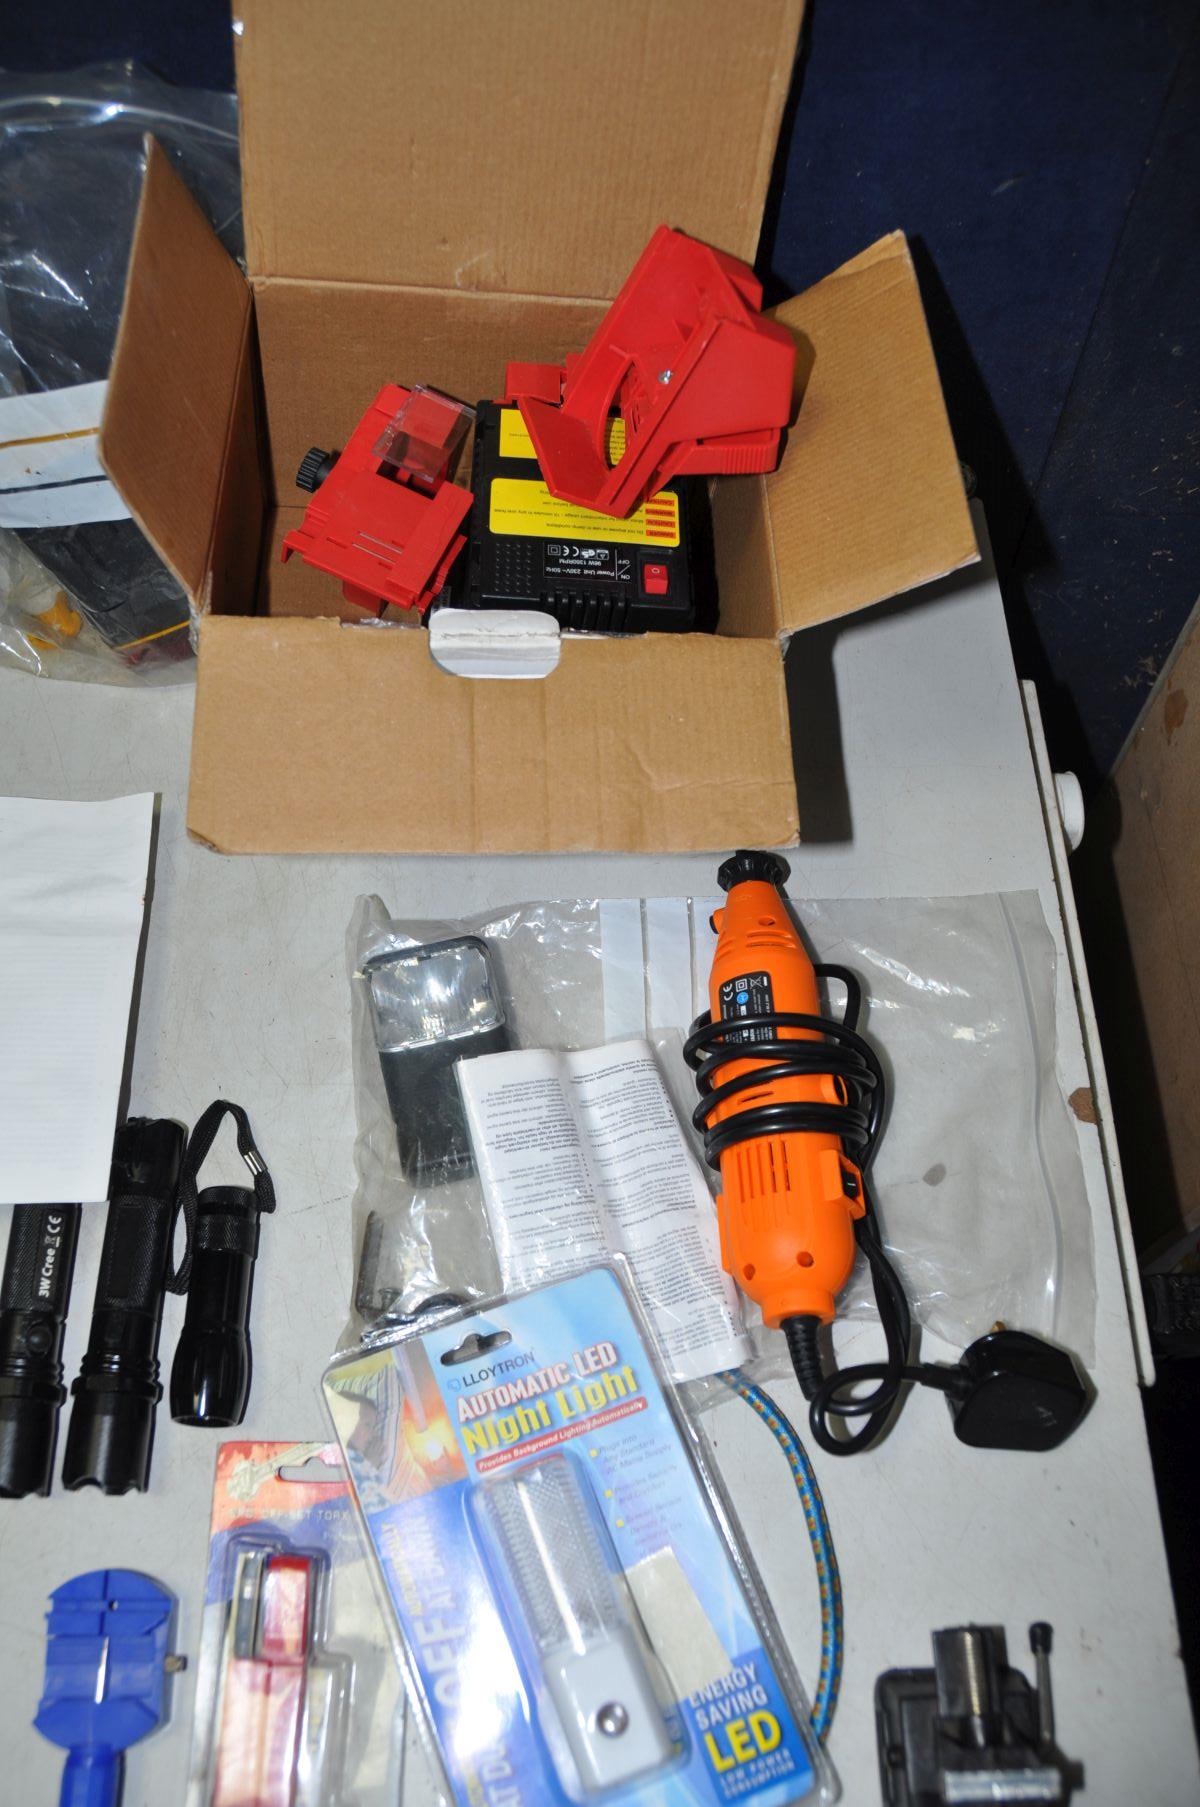 A SELECTION OF TOOLS AND SPARES to include a multipurpose electric sharpener, a VonHaus rotary - Bild 2 aus 4